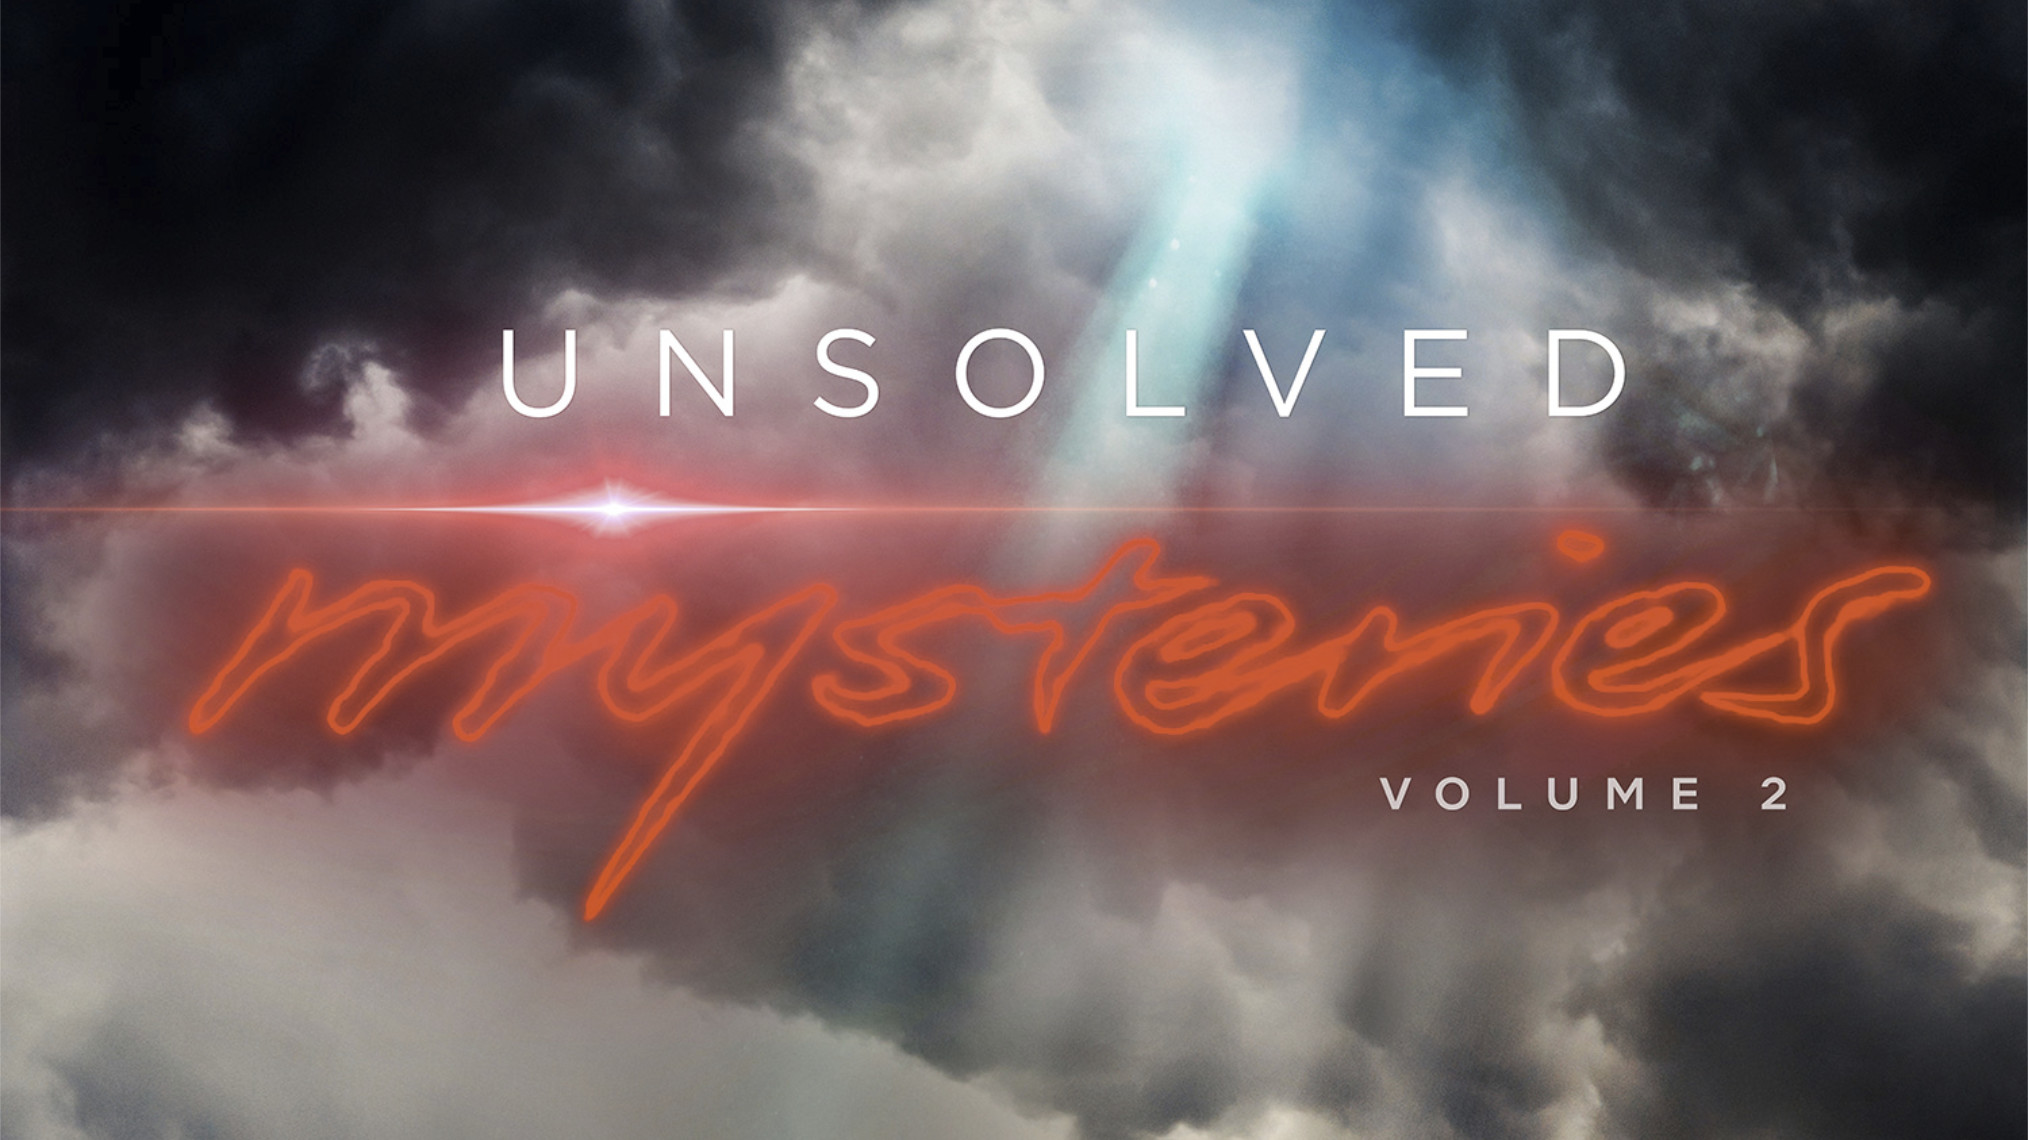 What the Cases of 'Unsolved Mysteries' 2?